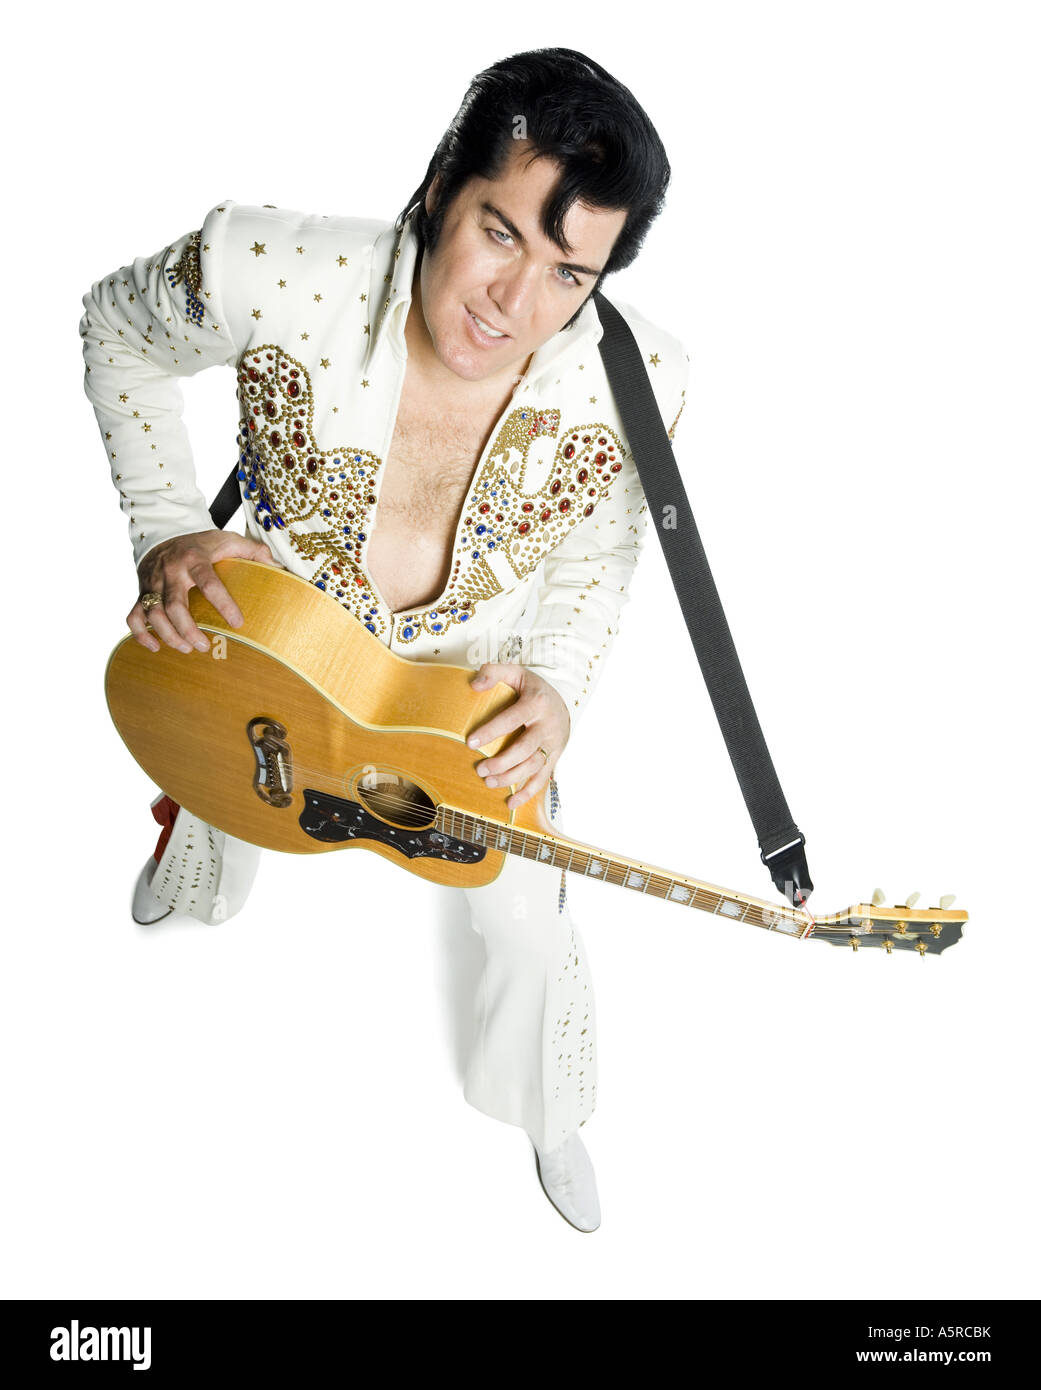 Overhead portrait of an Elvis impersonator holding a guitar Stock Photo